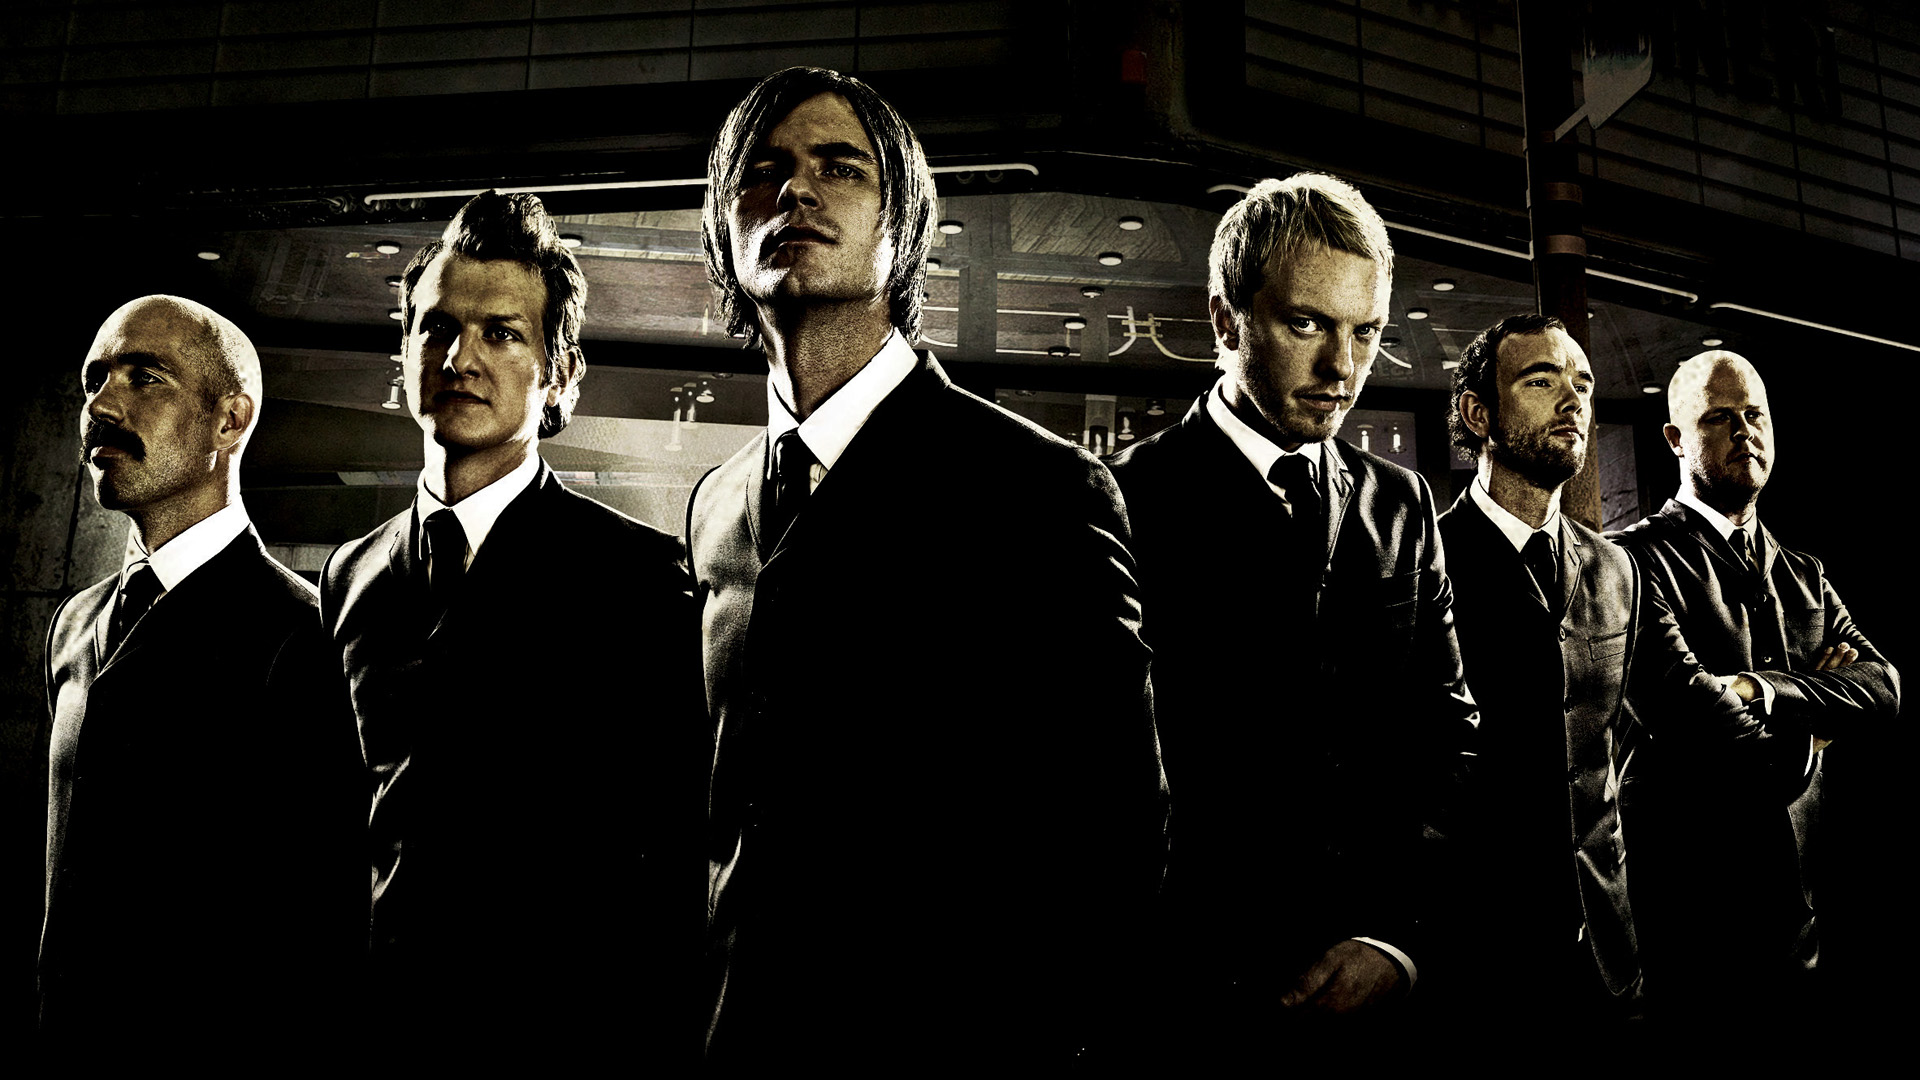 Kaizers Orchestra Backgrounds, Compatible - PC, Mobile, Gadgets| 1920x1080 px